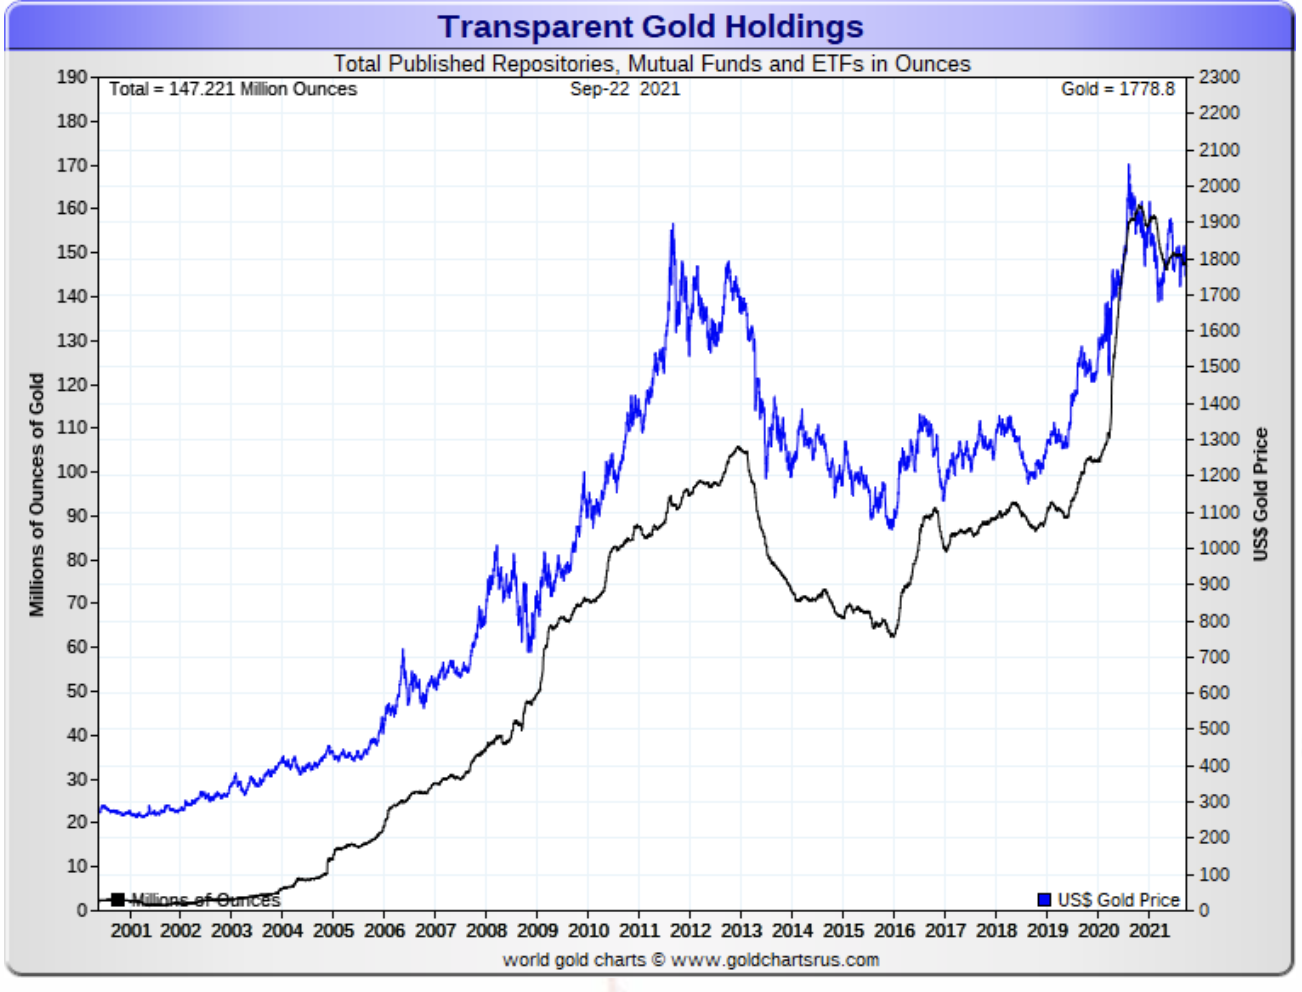 overlay line chart showing gold ETF holdings and gold price 2001 to present